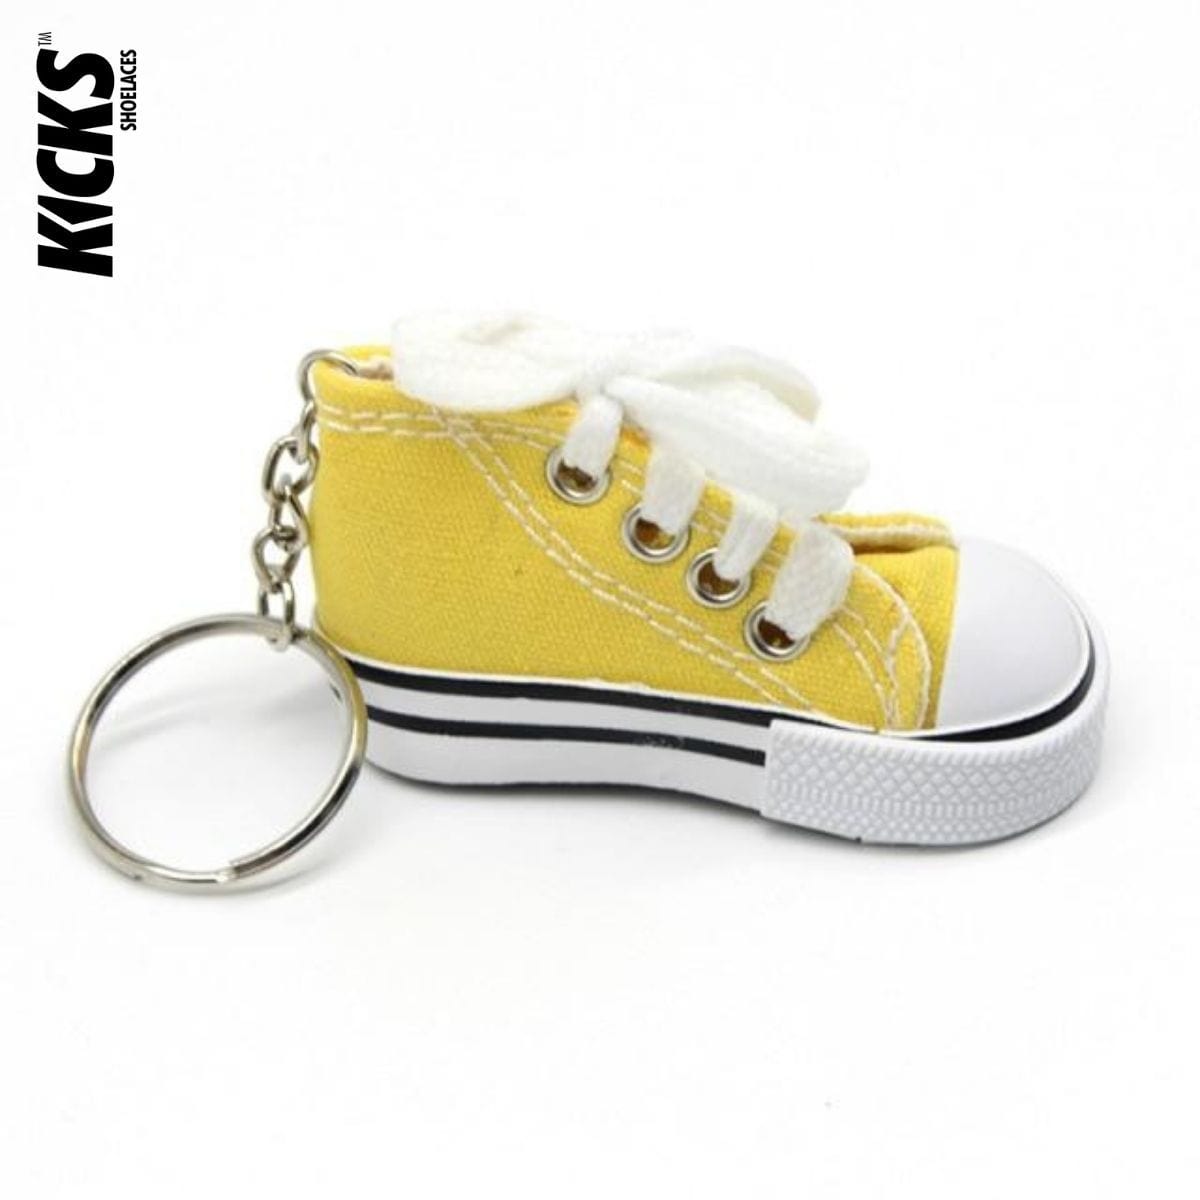 yellow-high-top-sneaker-keychain-perfect-gift-best-charm-accessories.jpg